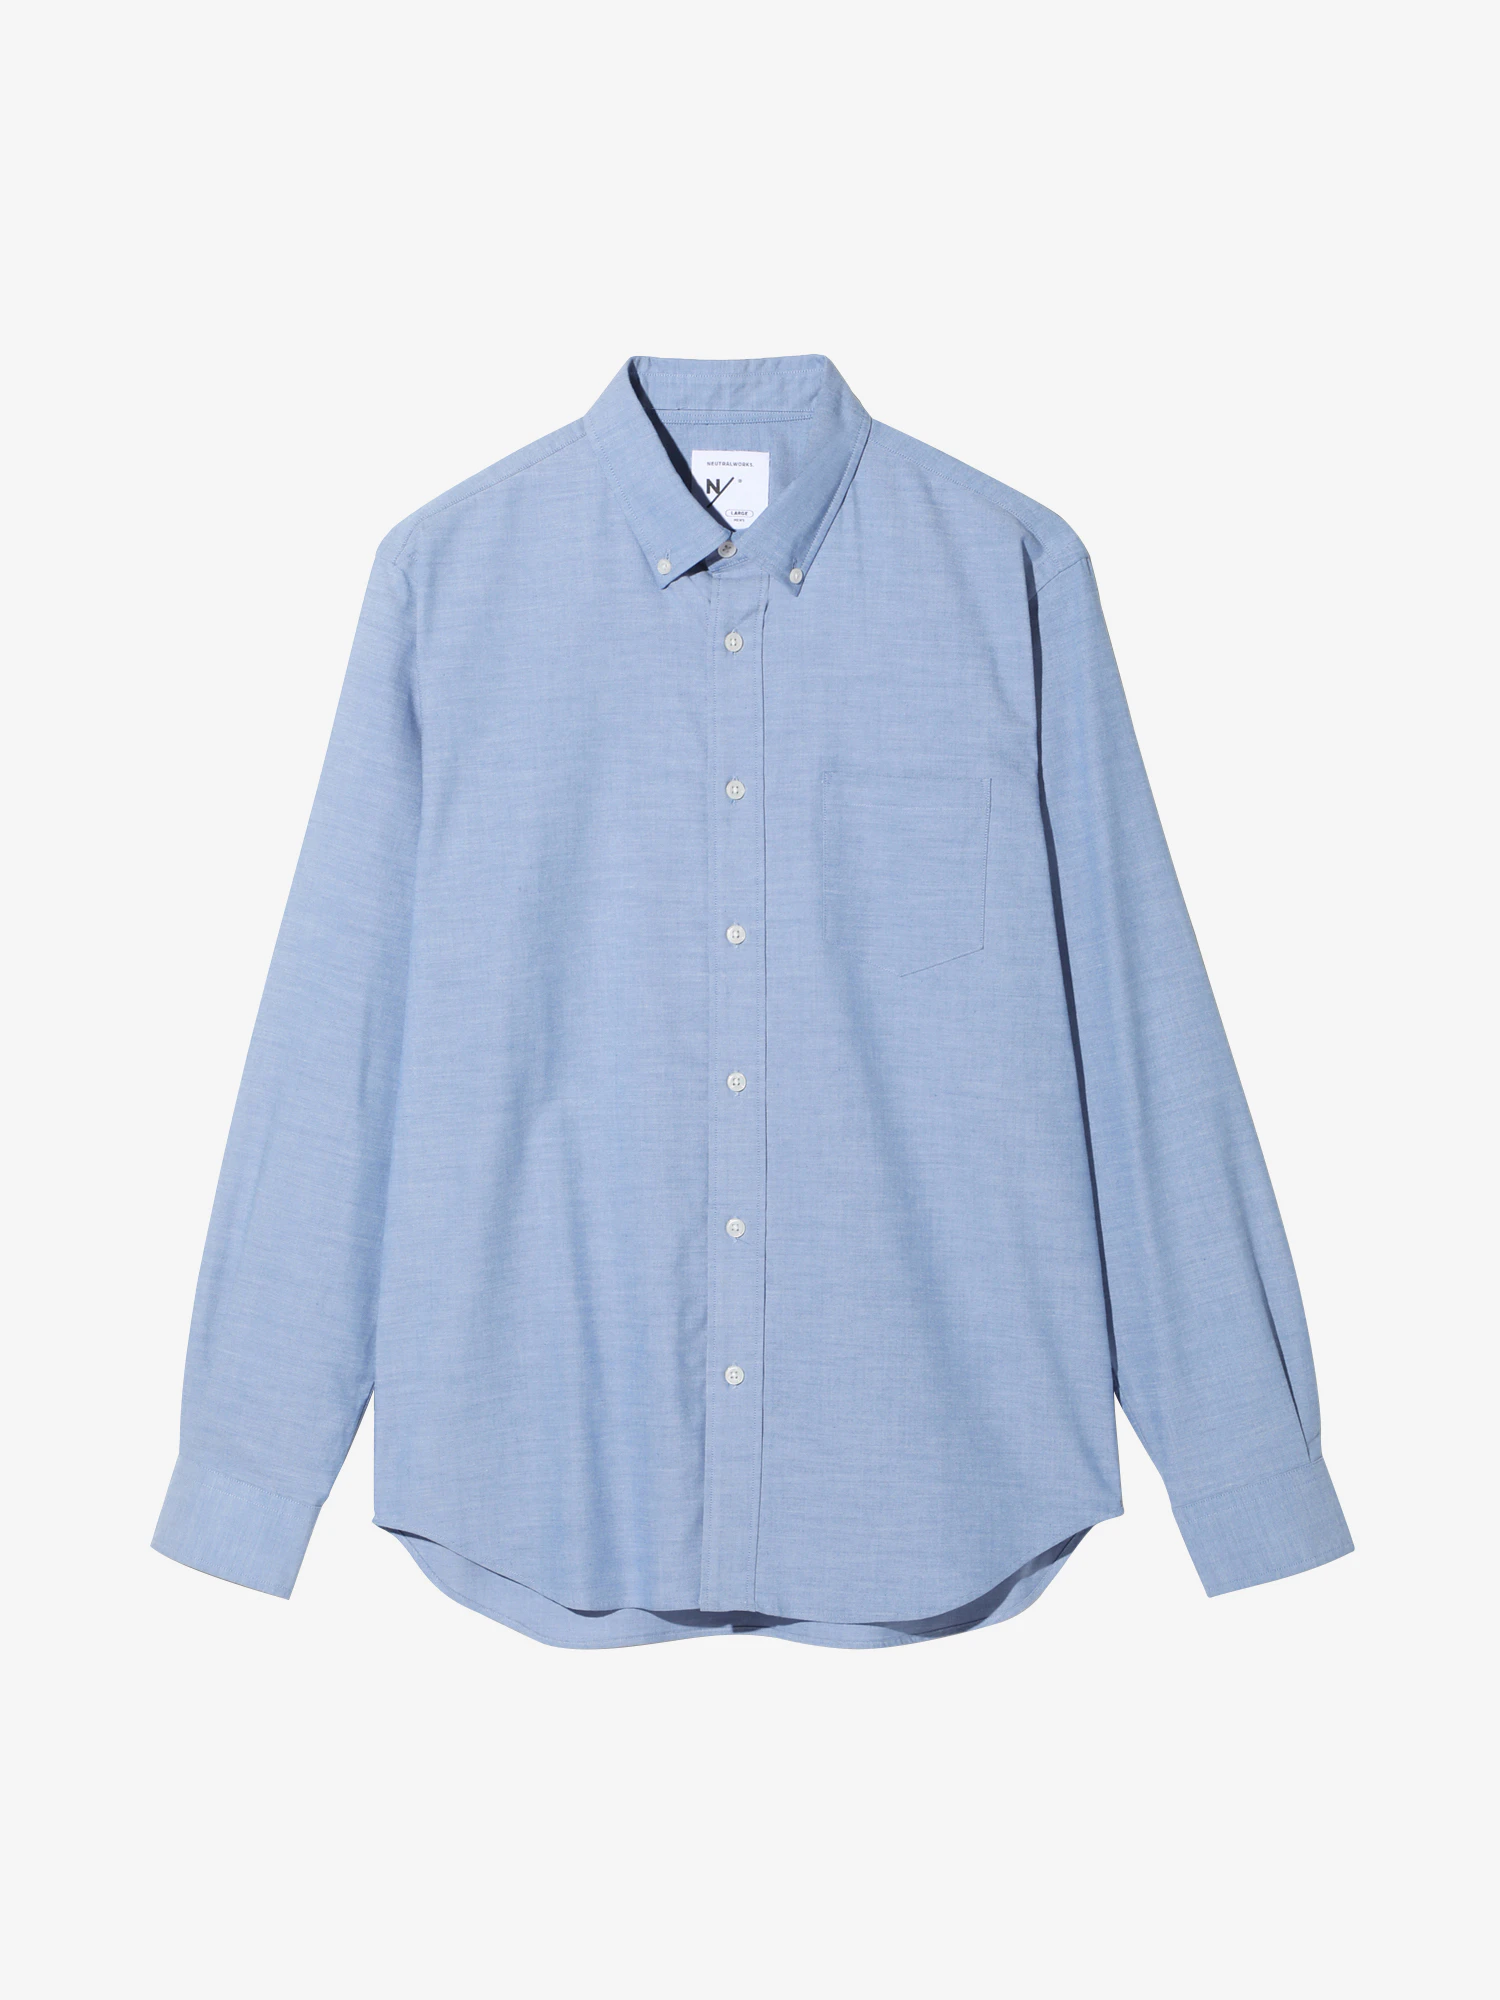 A button-down shirt categorized under "WORK," made from odor-eliminating, stretchy Oxford material. Carefully sewn at a shirt factory in Hitoyoshi City, Kumamoto Prefecture. Priced at 17,600 yen (tax included)